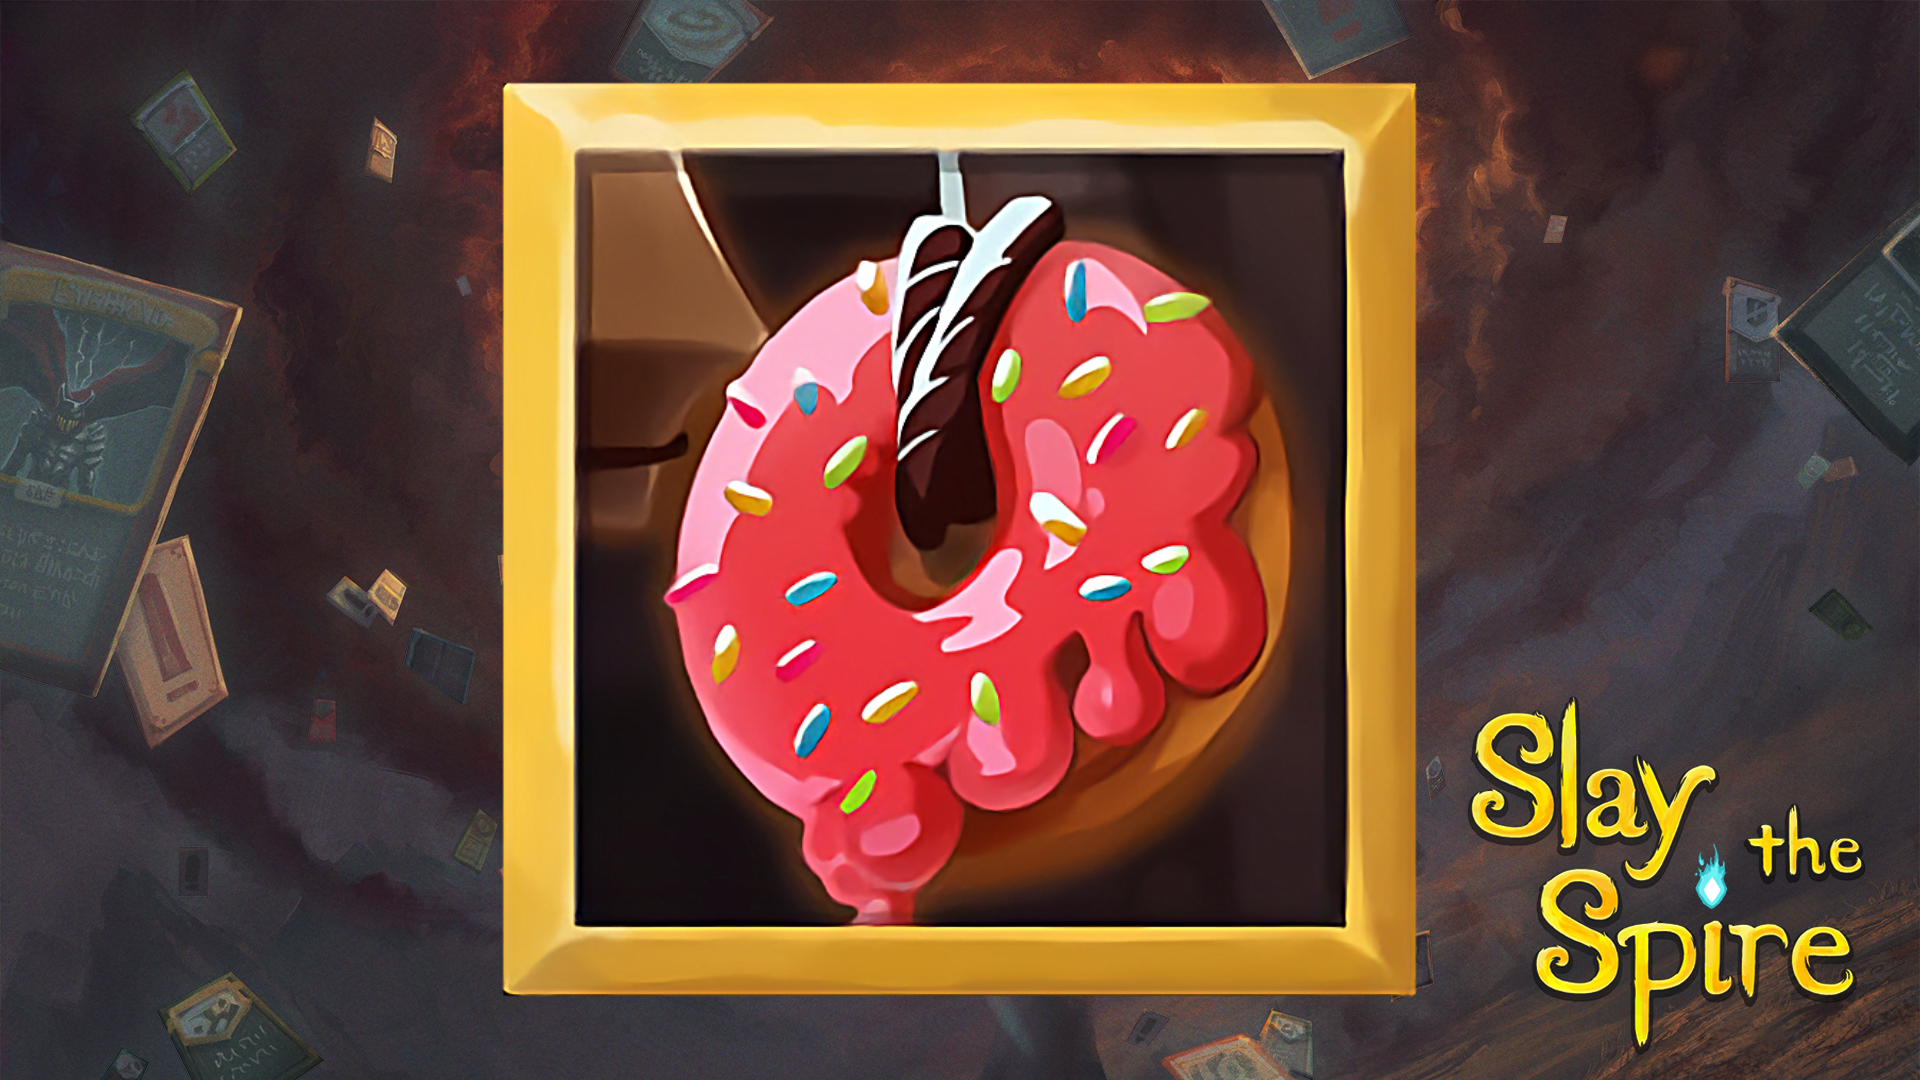 Icon for Ooh Donut!